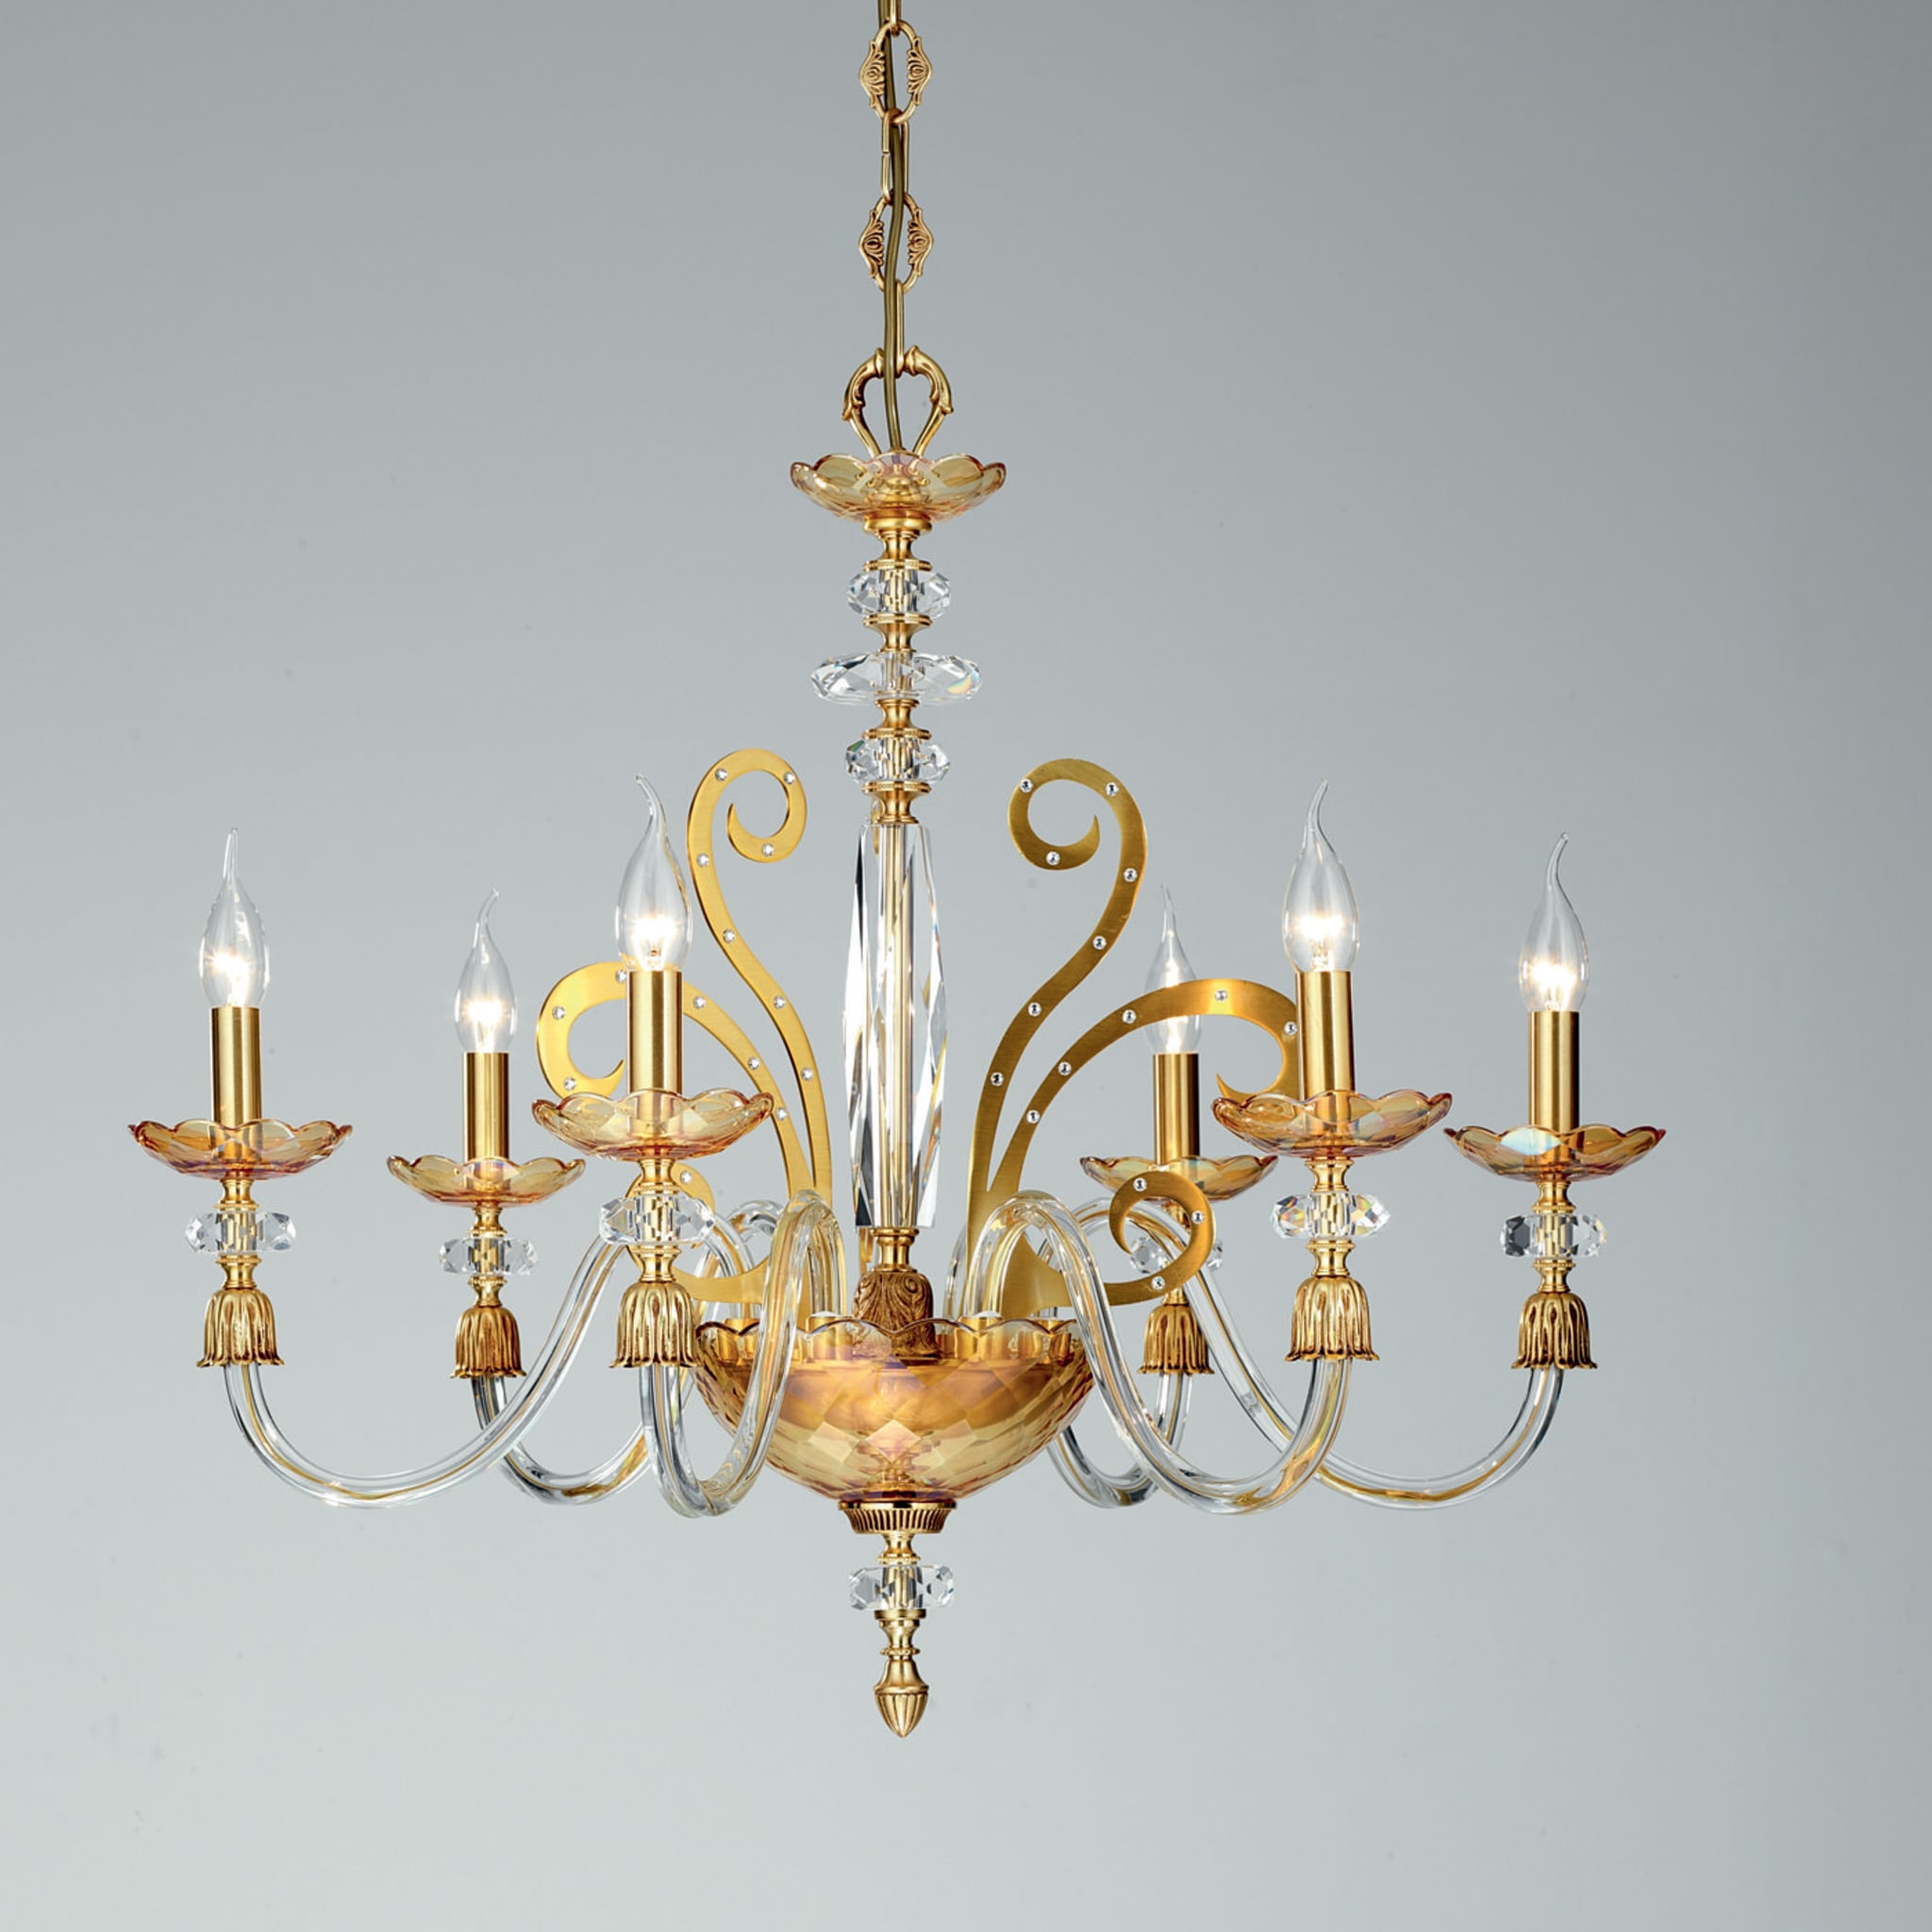 6 light chandelier in glass and gold - Alternative view 1